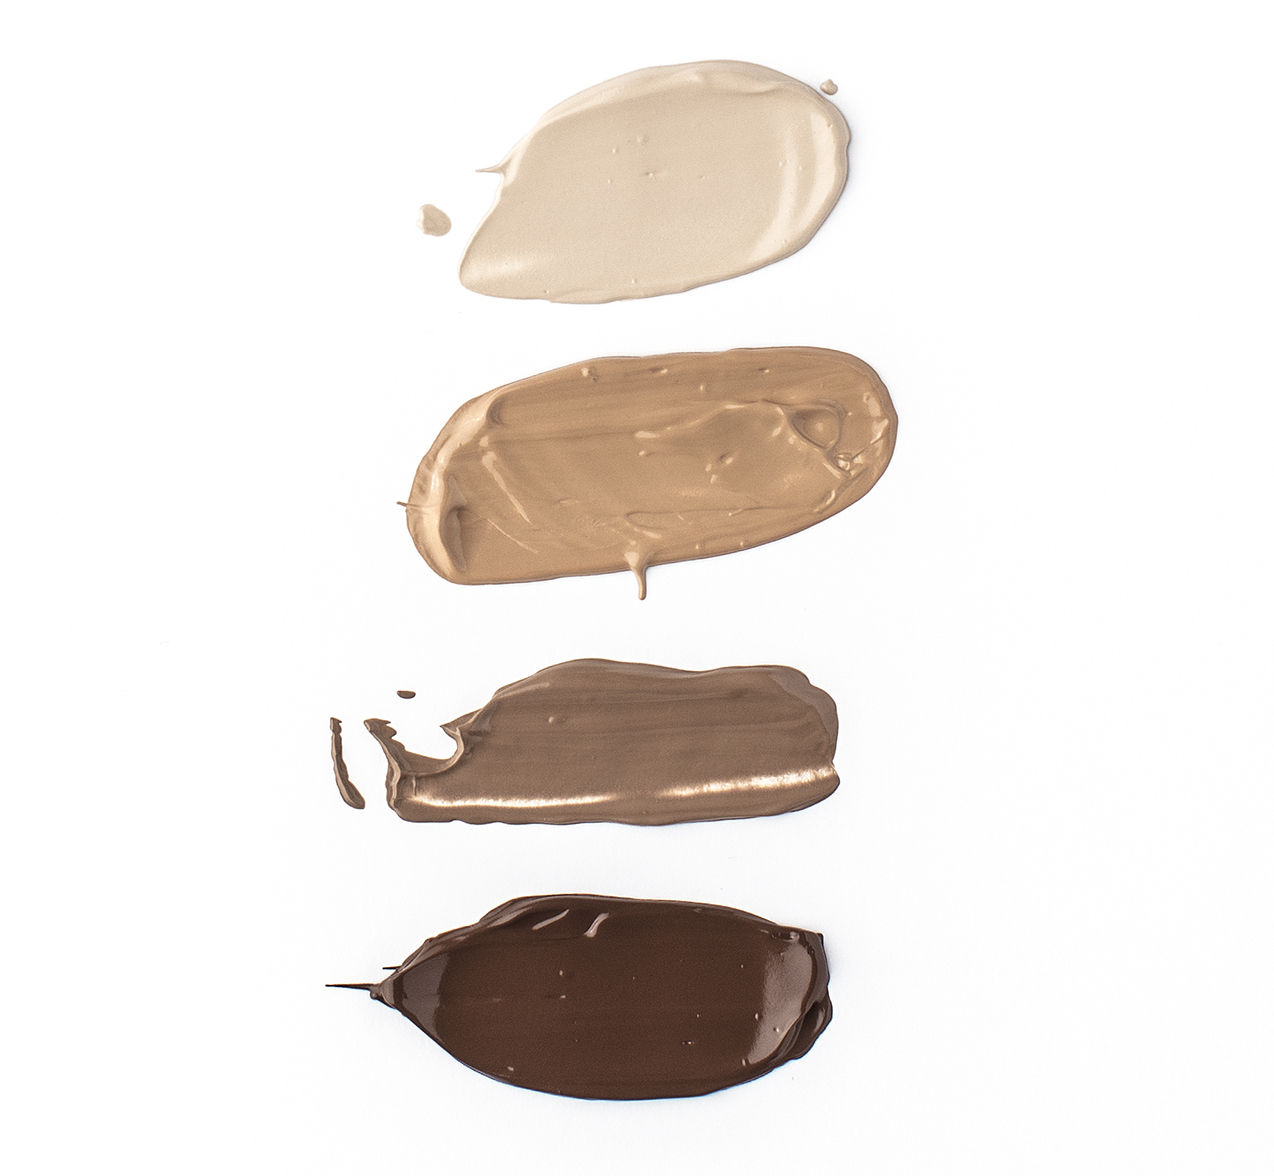 How to Apply Tinted Moisturizer